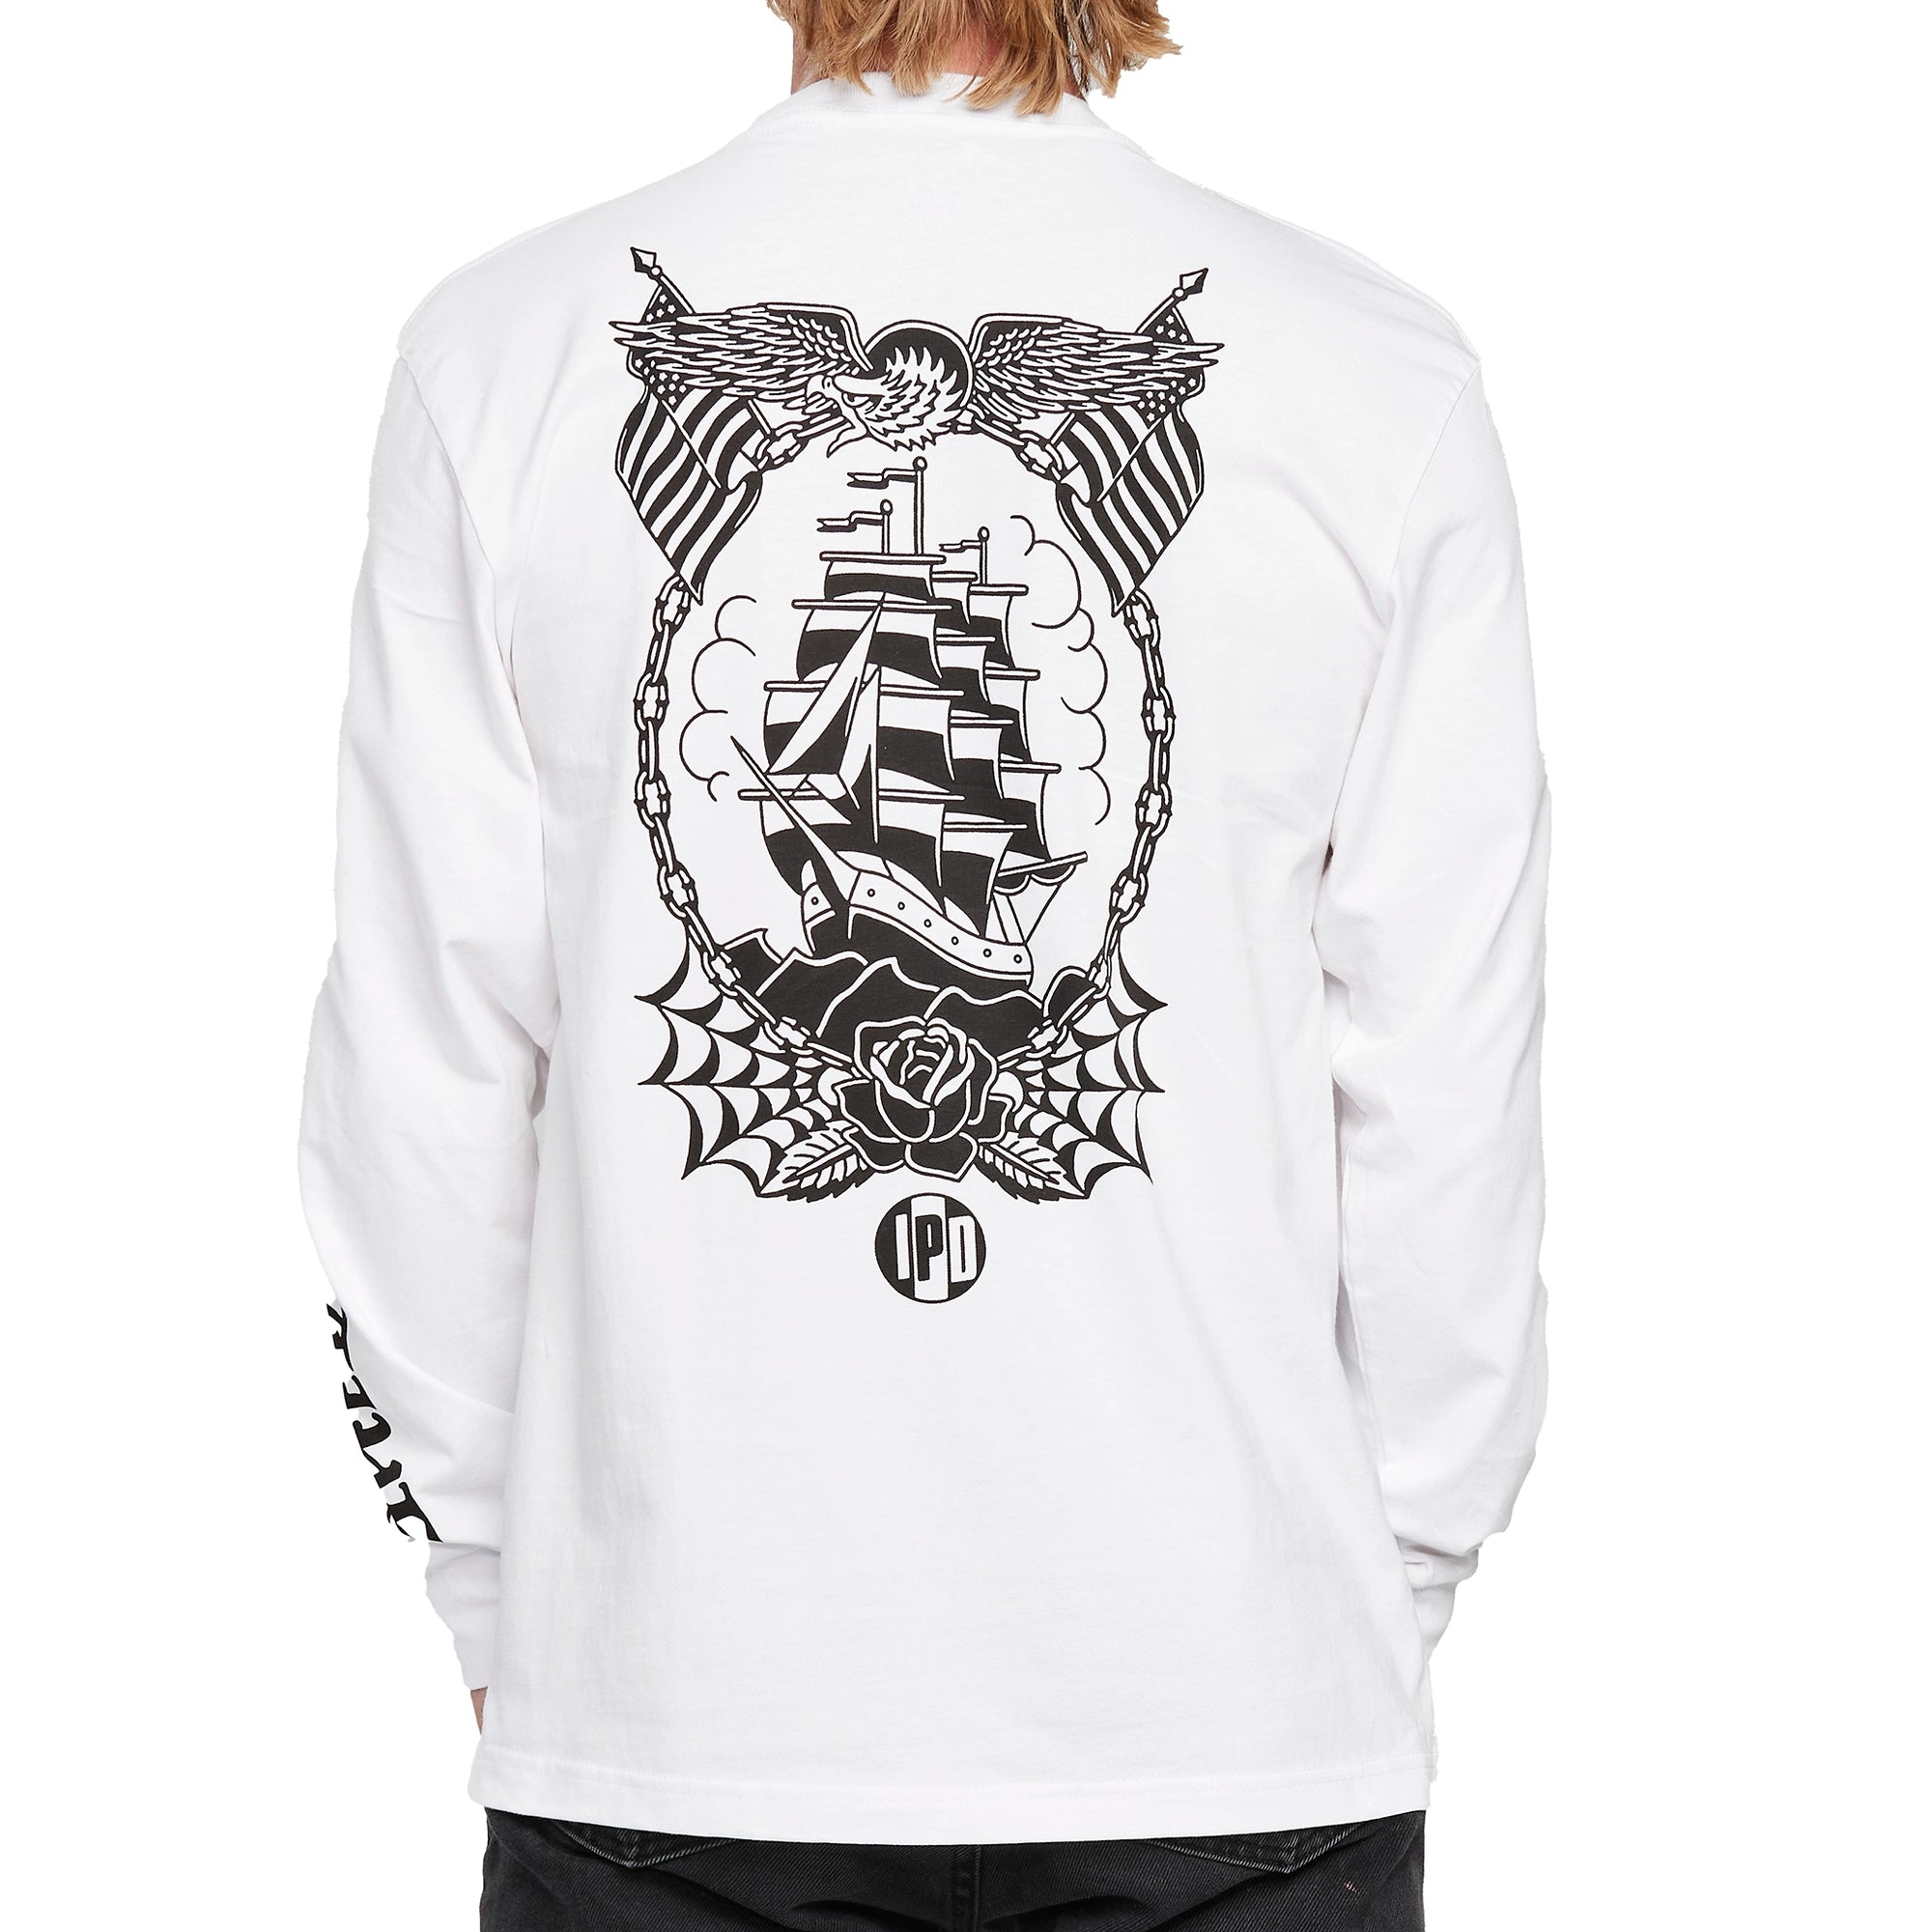 Back view of a white long sleeve tee with a large printed black emblem of an old ship sailing at sea. Above the emblem is an eagle spreading its wings with two American flags on each side. Below the emblem is a rose with symmetrical spider webs on each side. The I P D logo is below.